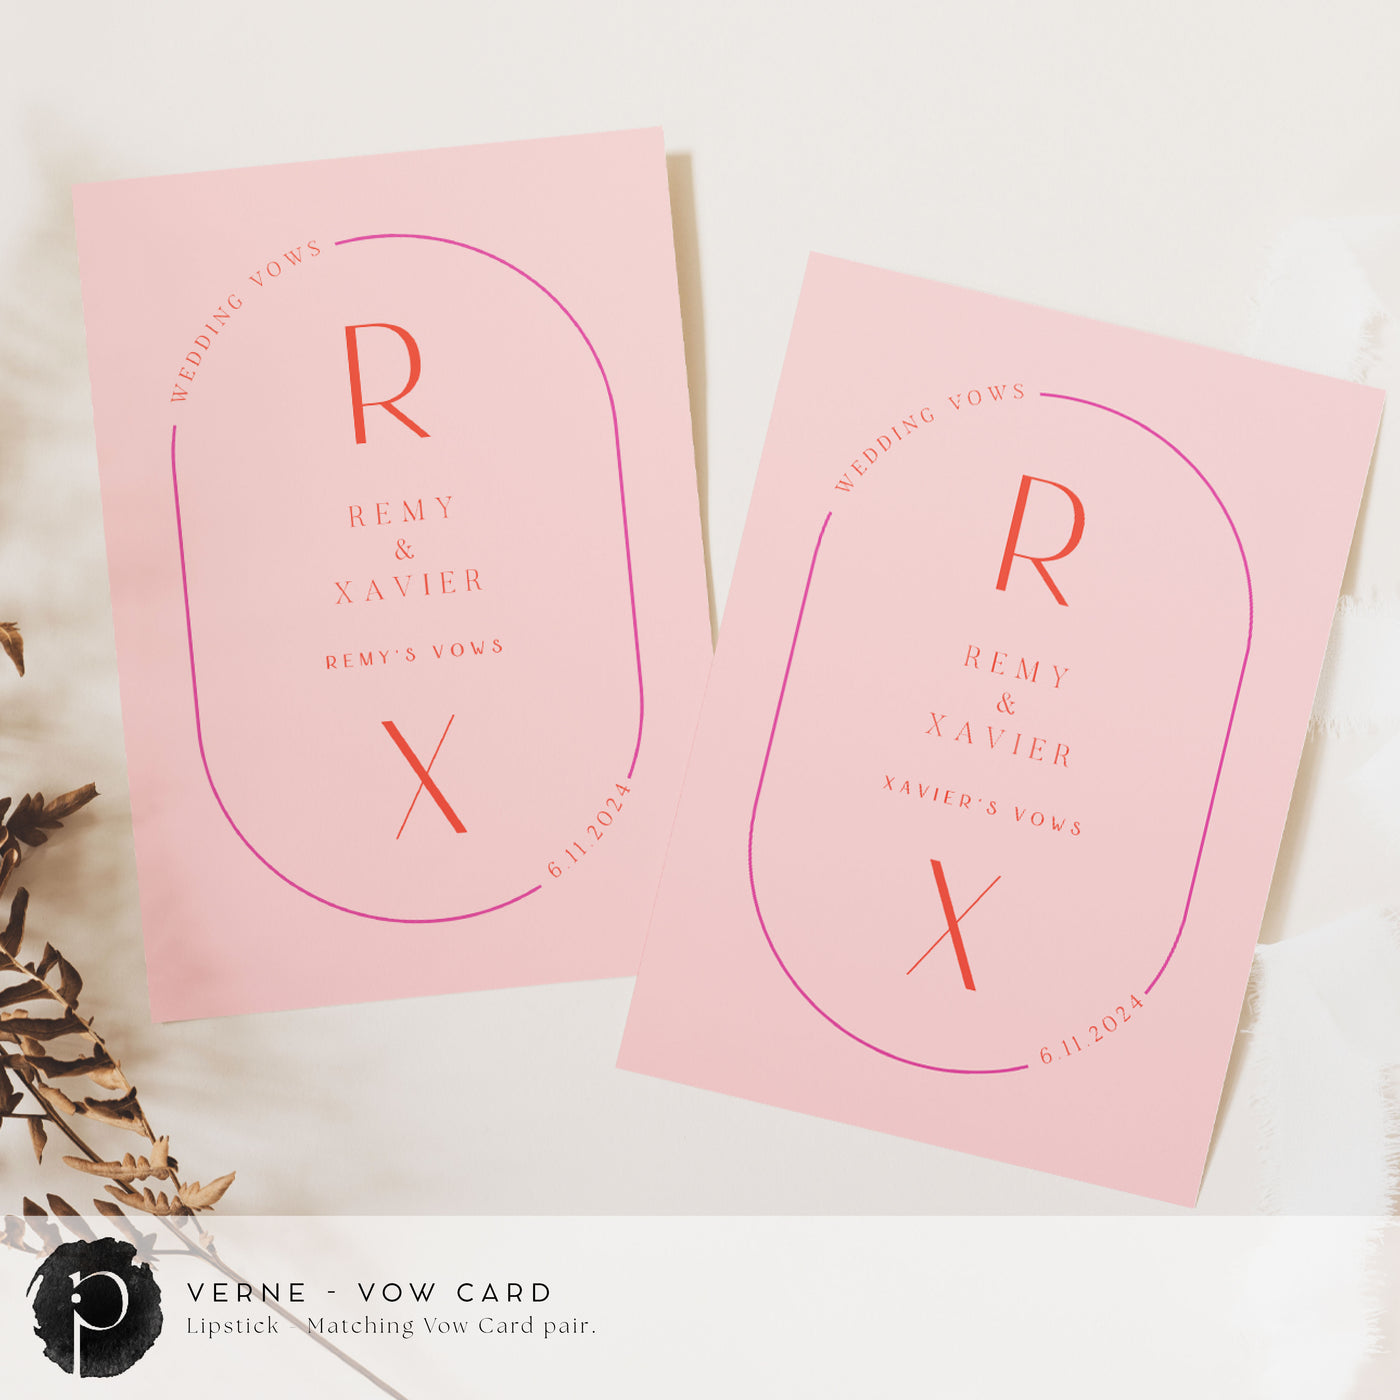 A pair of vow cards to write your wedding vows on in a modern midcentury wedding theme with rosy pink background and fuschia and bright red writing